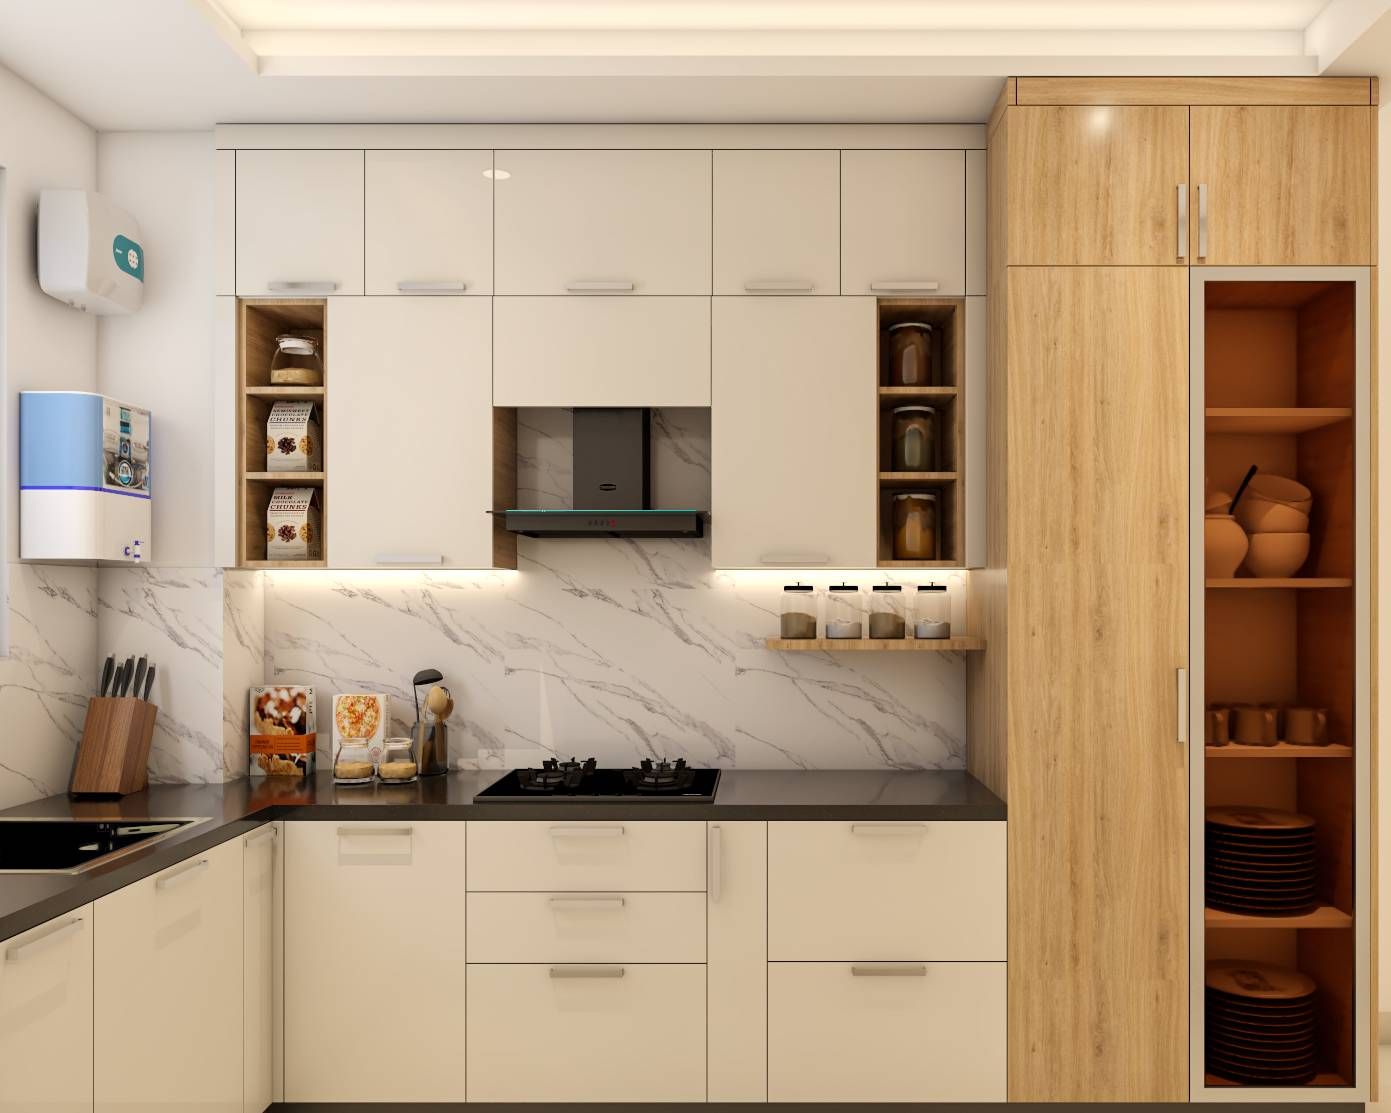 Contemporary L-Shaped Kitchen Design With Suede Laminates